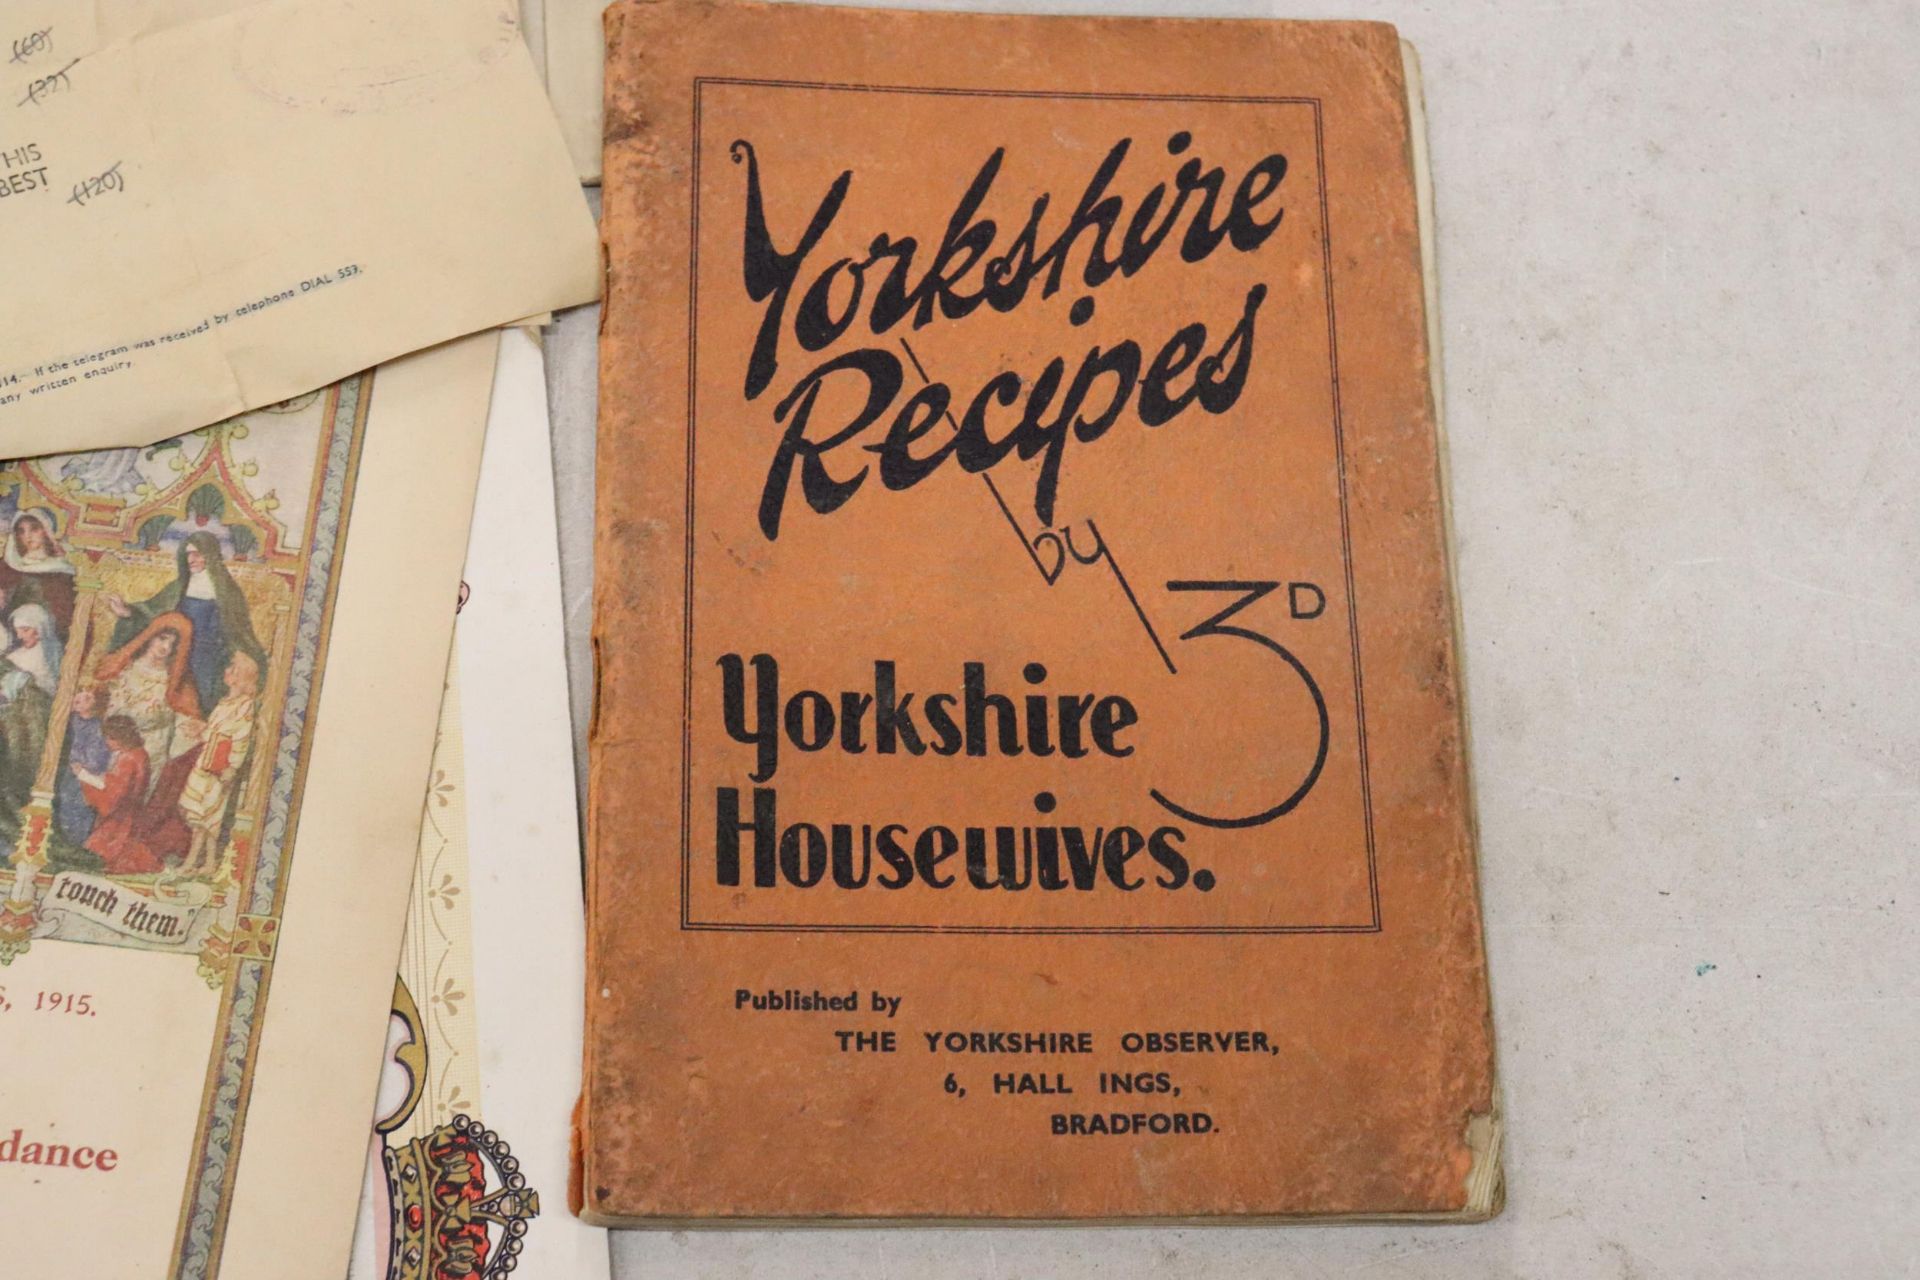 A COLLECTION OF MIXED EPHEMERA TO INCLUDE YORKSHIRE RECIPES BY YORKSHIRE HOUSEWIVES, OVERSEAS - Image 3 of 8